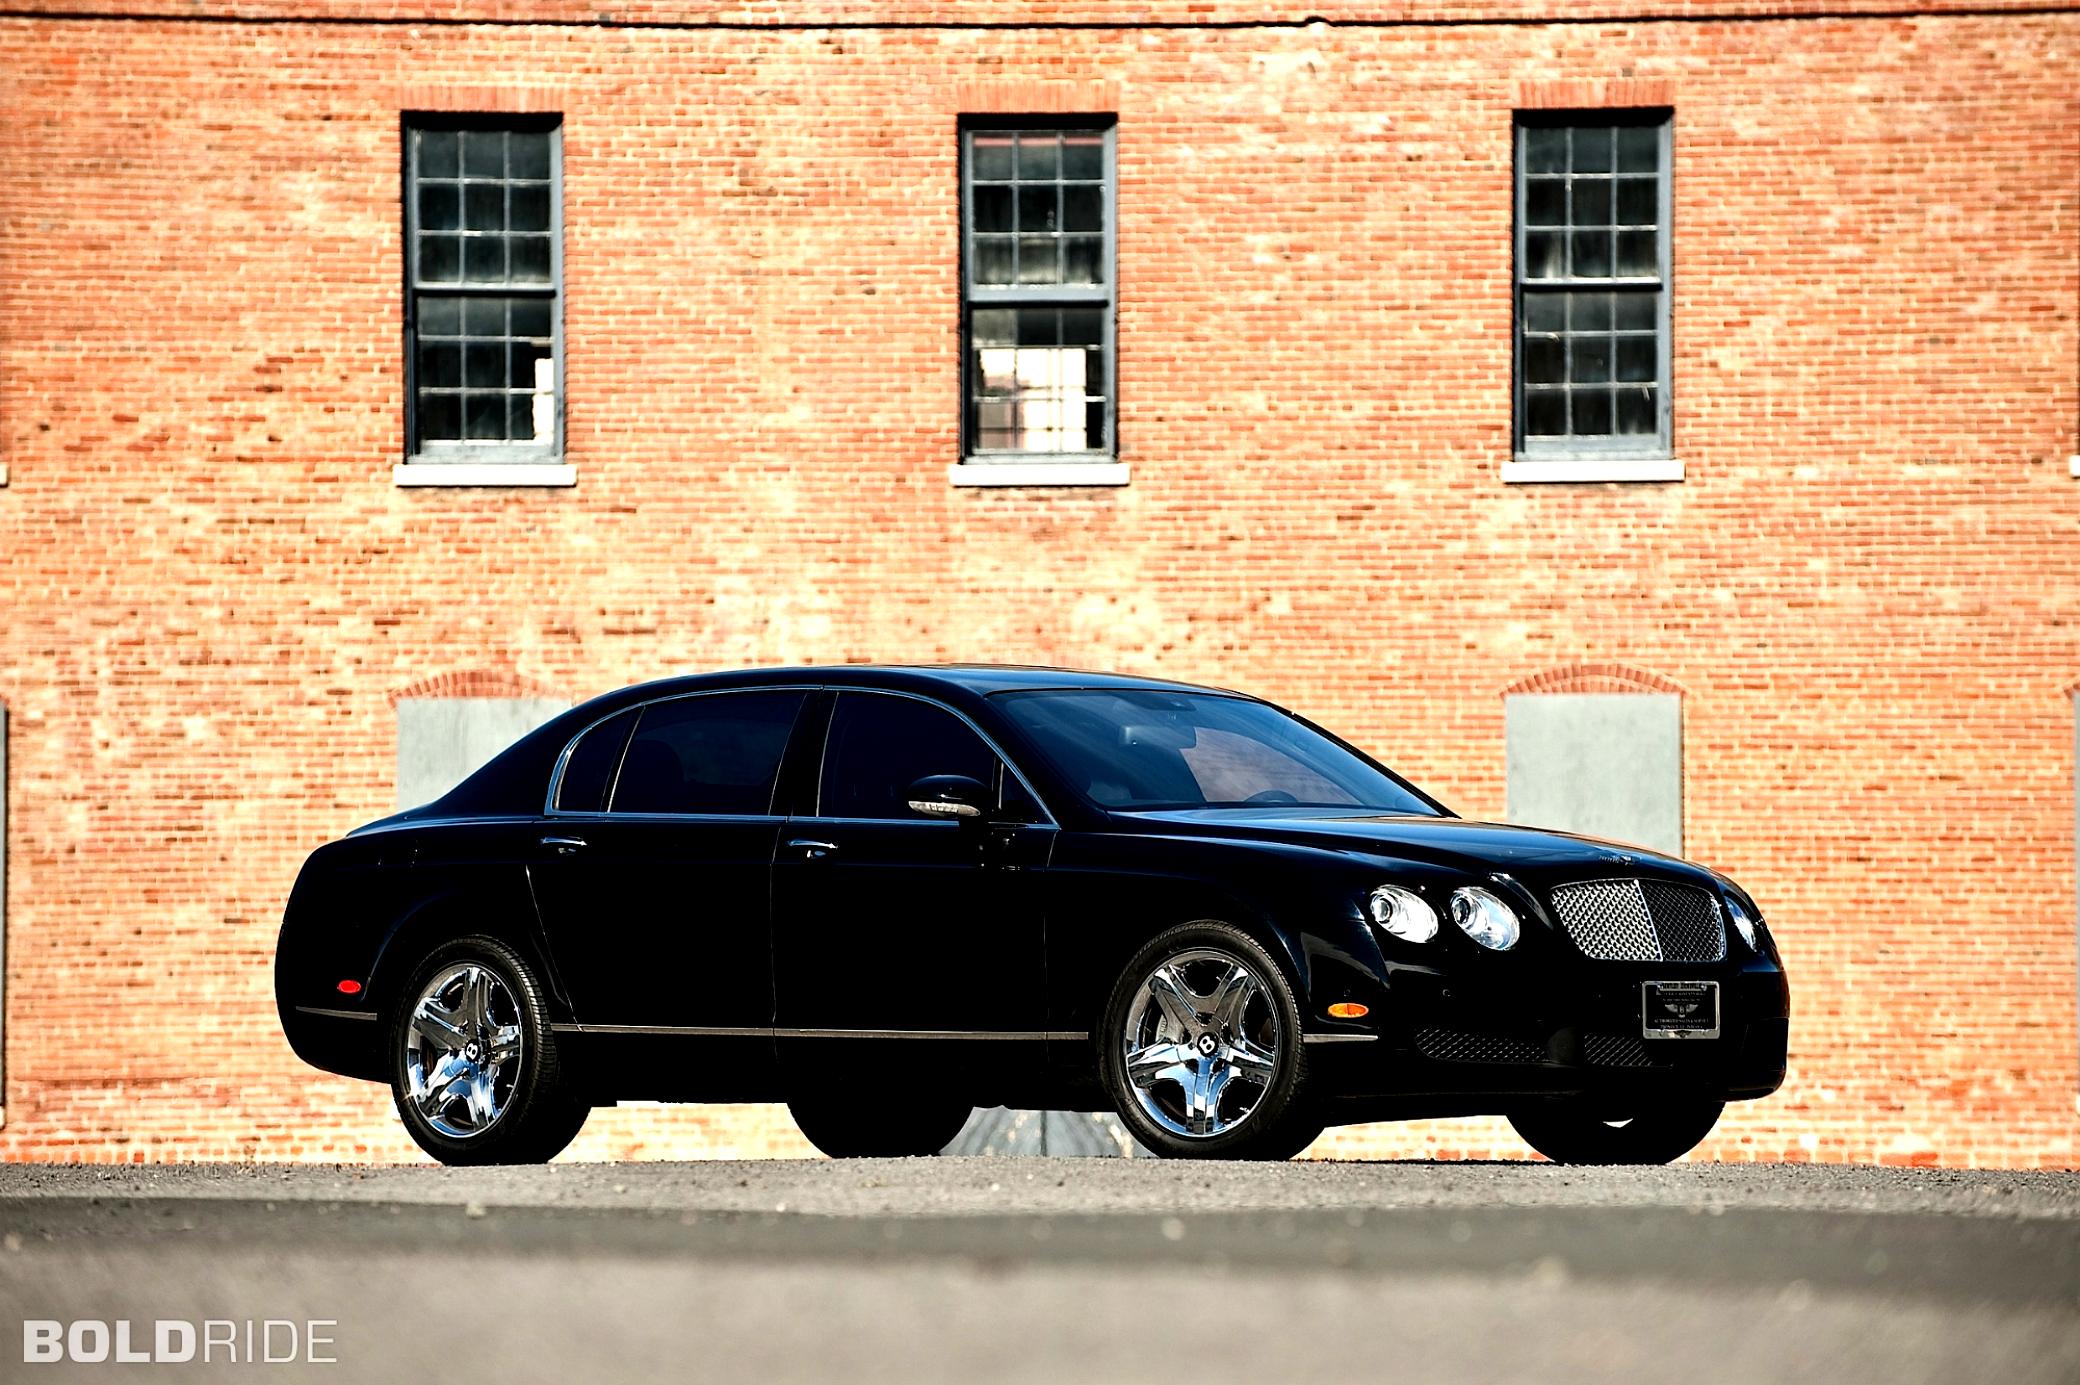 Bentley Continental Flying Spur 2005 #11